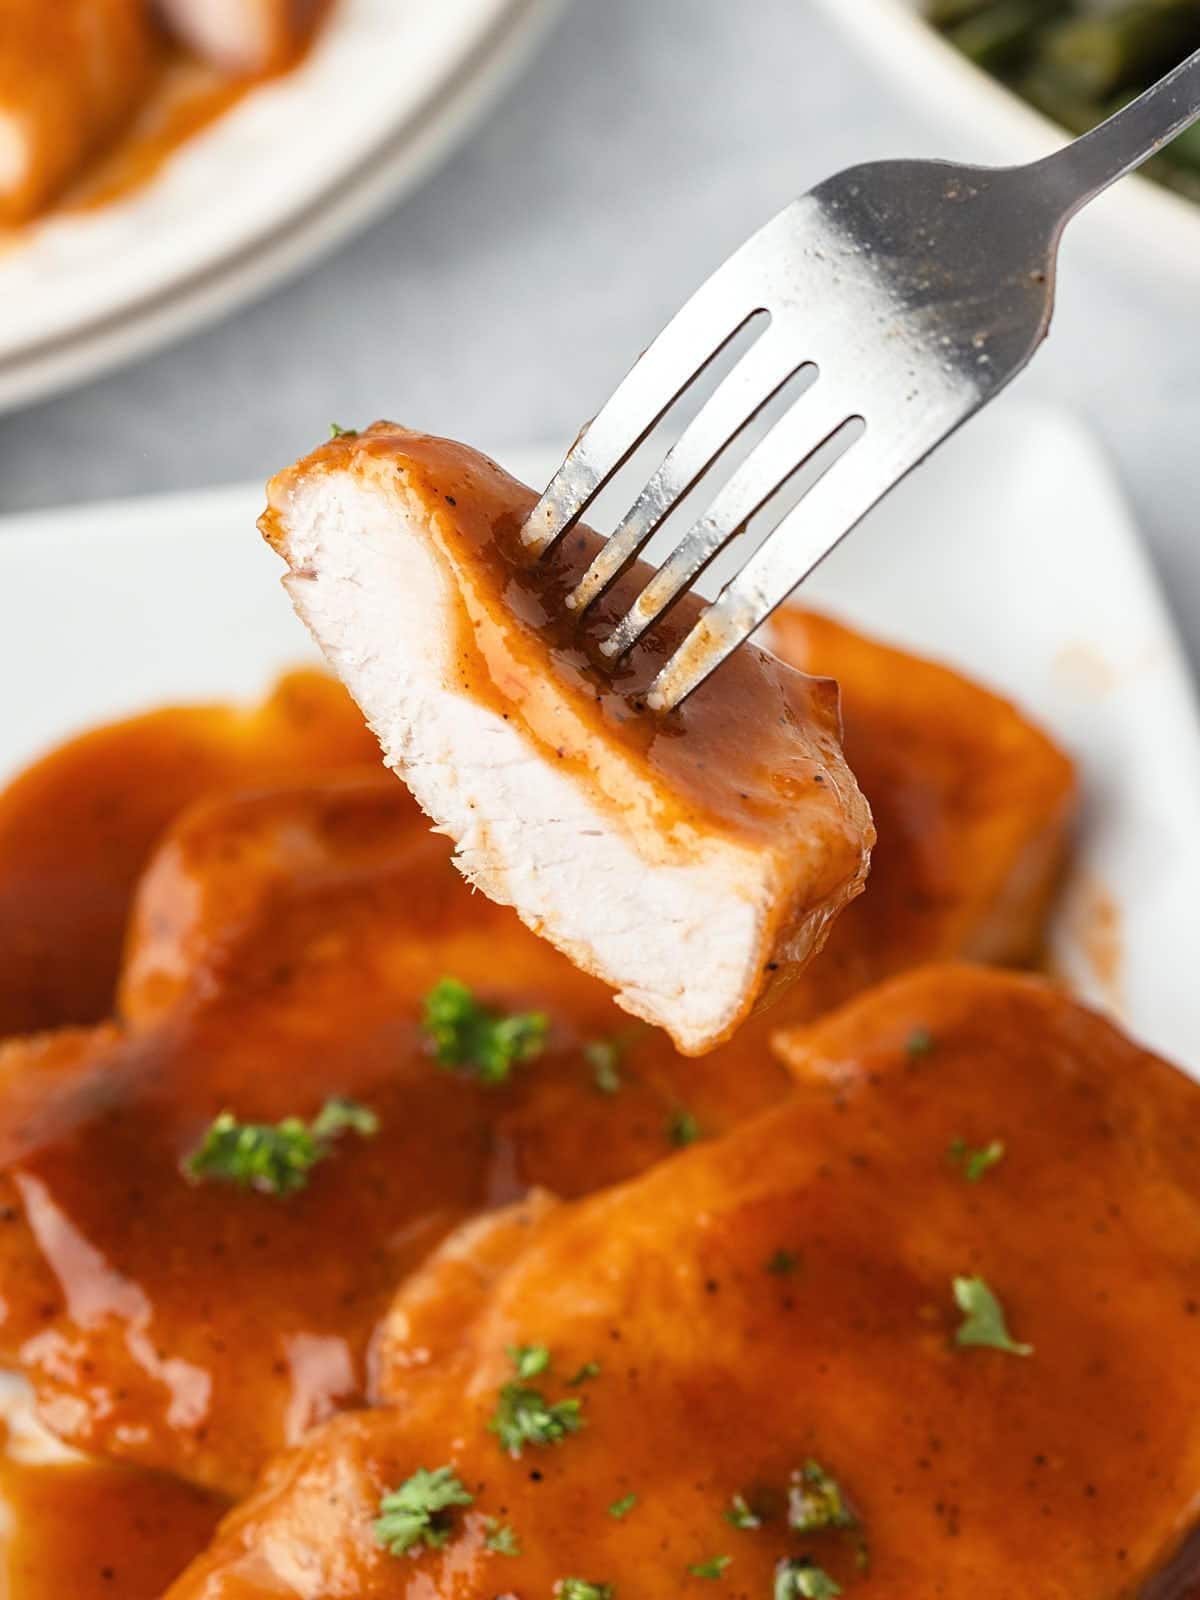 A fork is being used to pick up a piece of chicken.